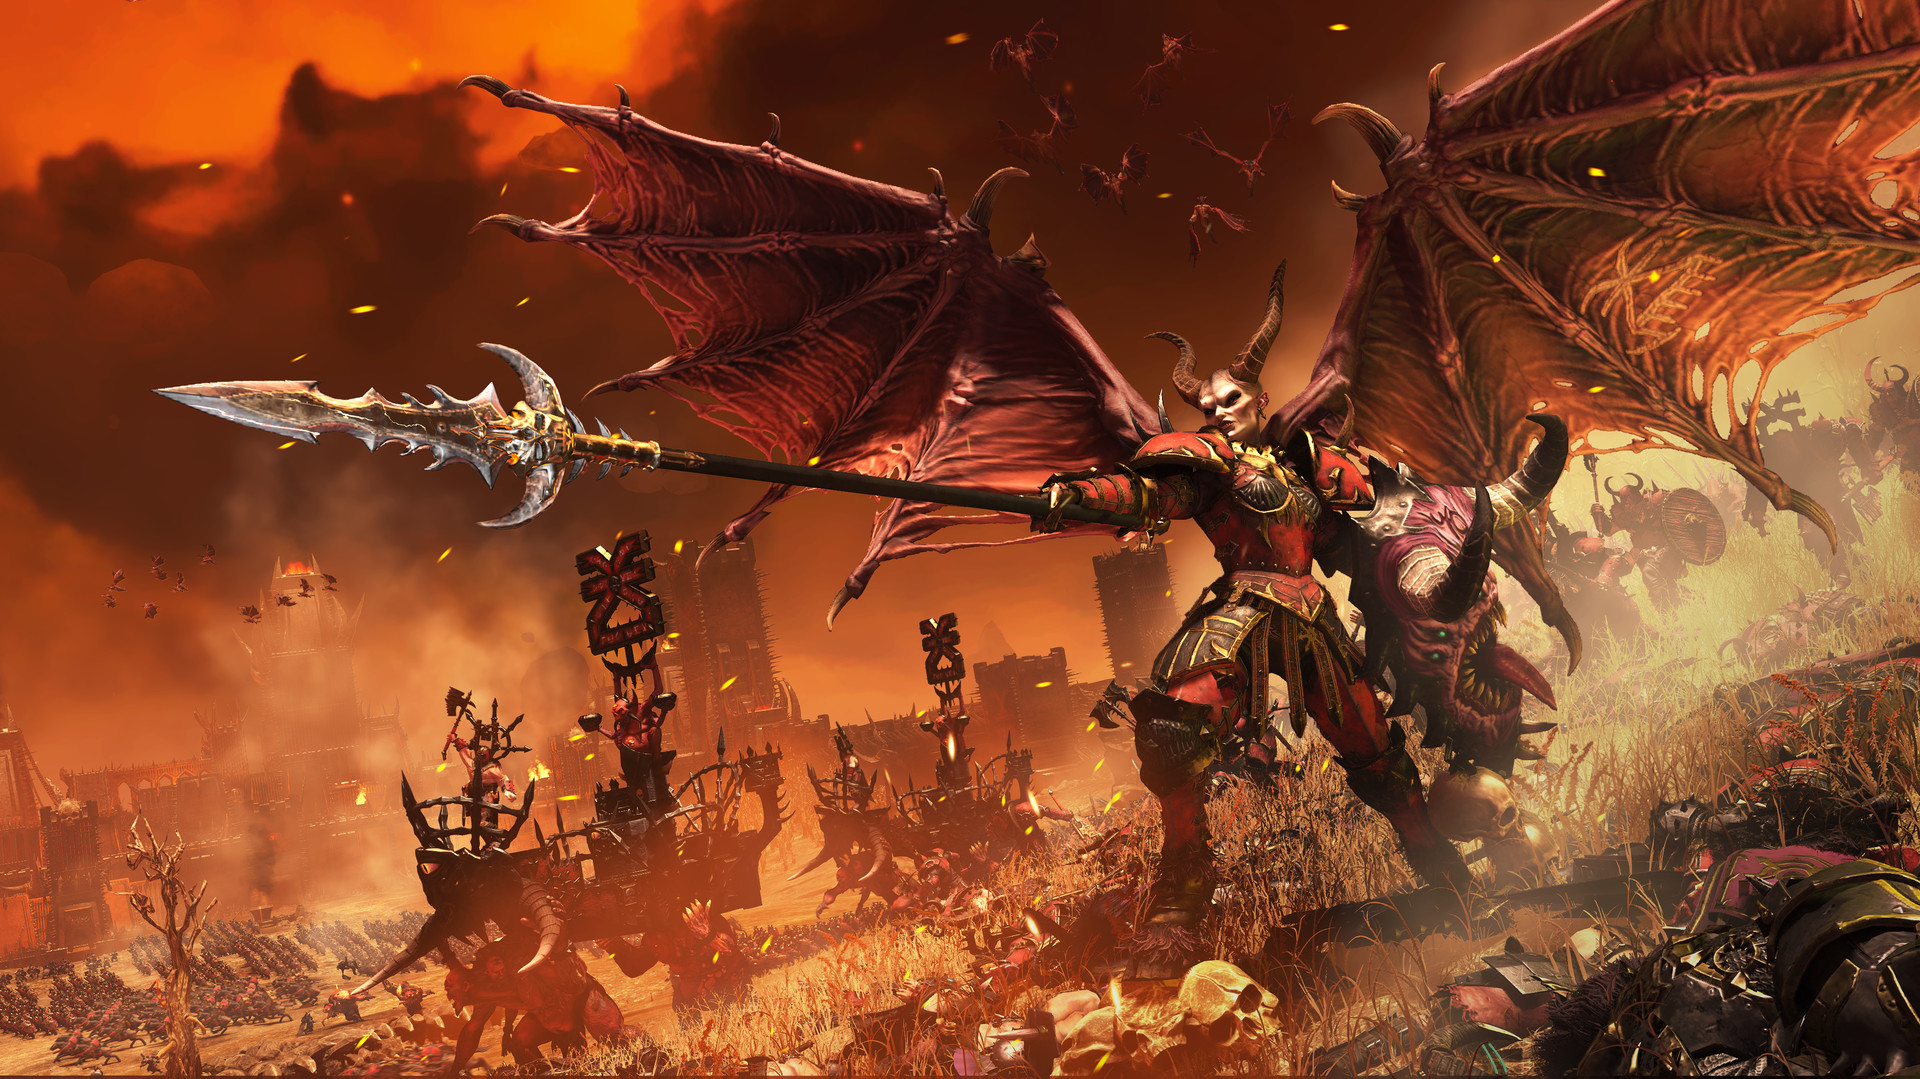 Save 10% on Total War: WARHAMMER III - Champions of Chaos on Steam